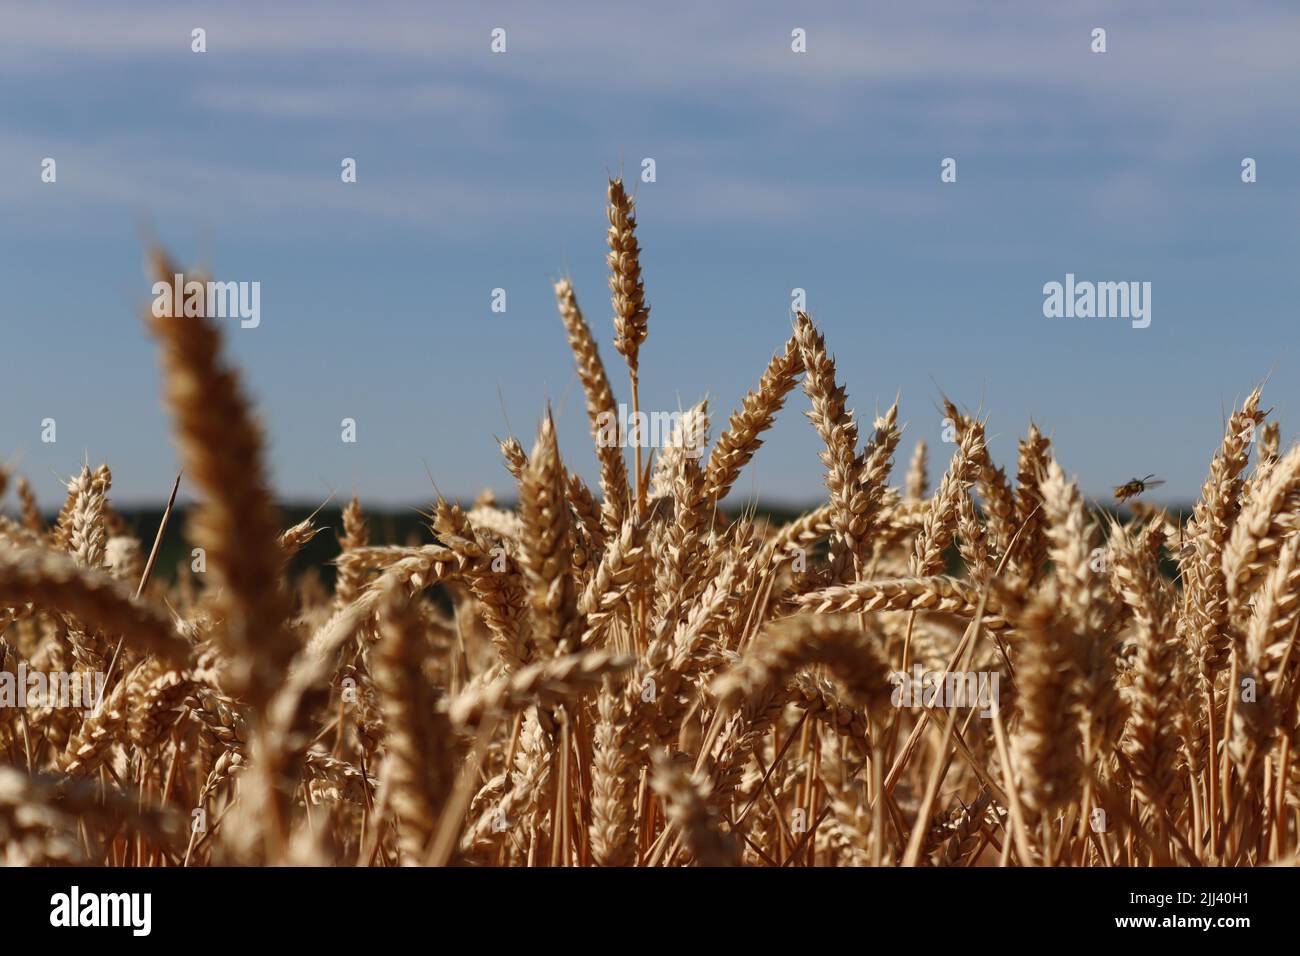 Ears of ripening corn sway in a the breeze, as a wasp takes flight. Stock Photo